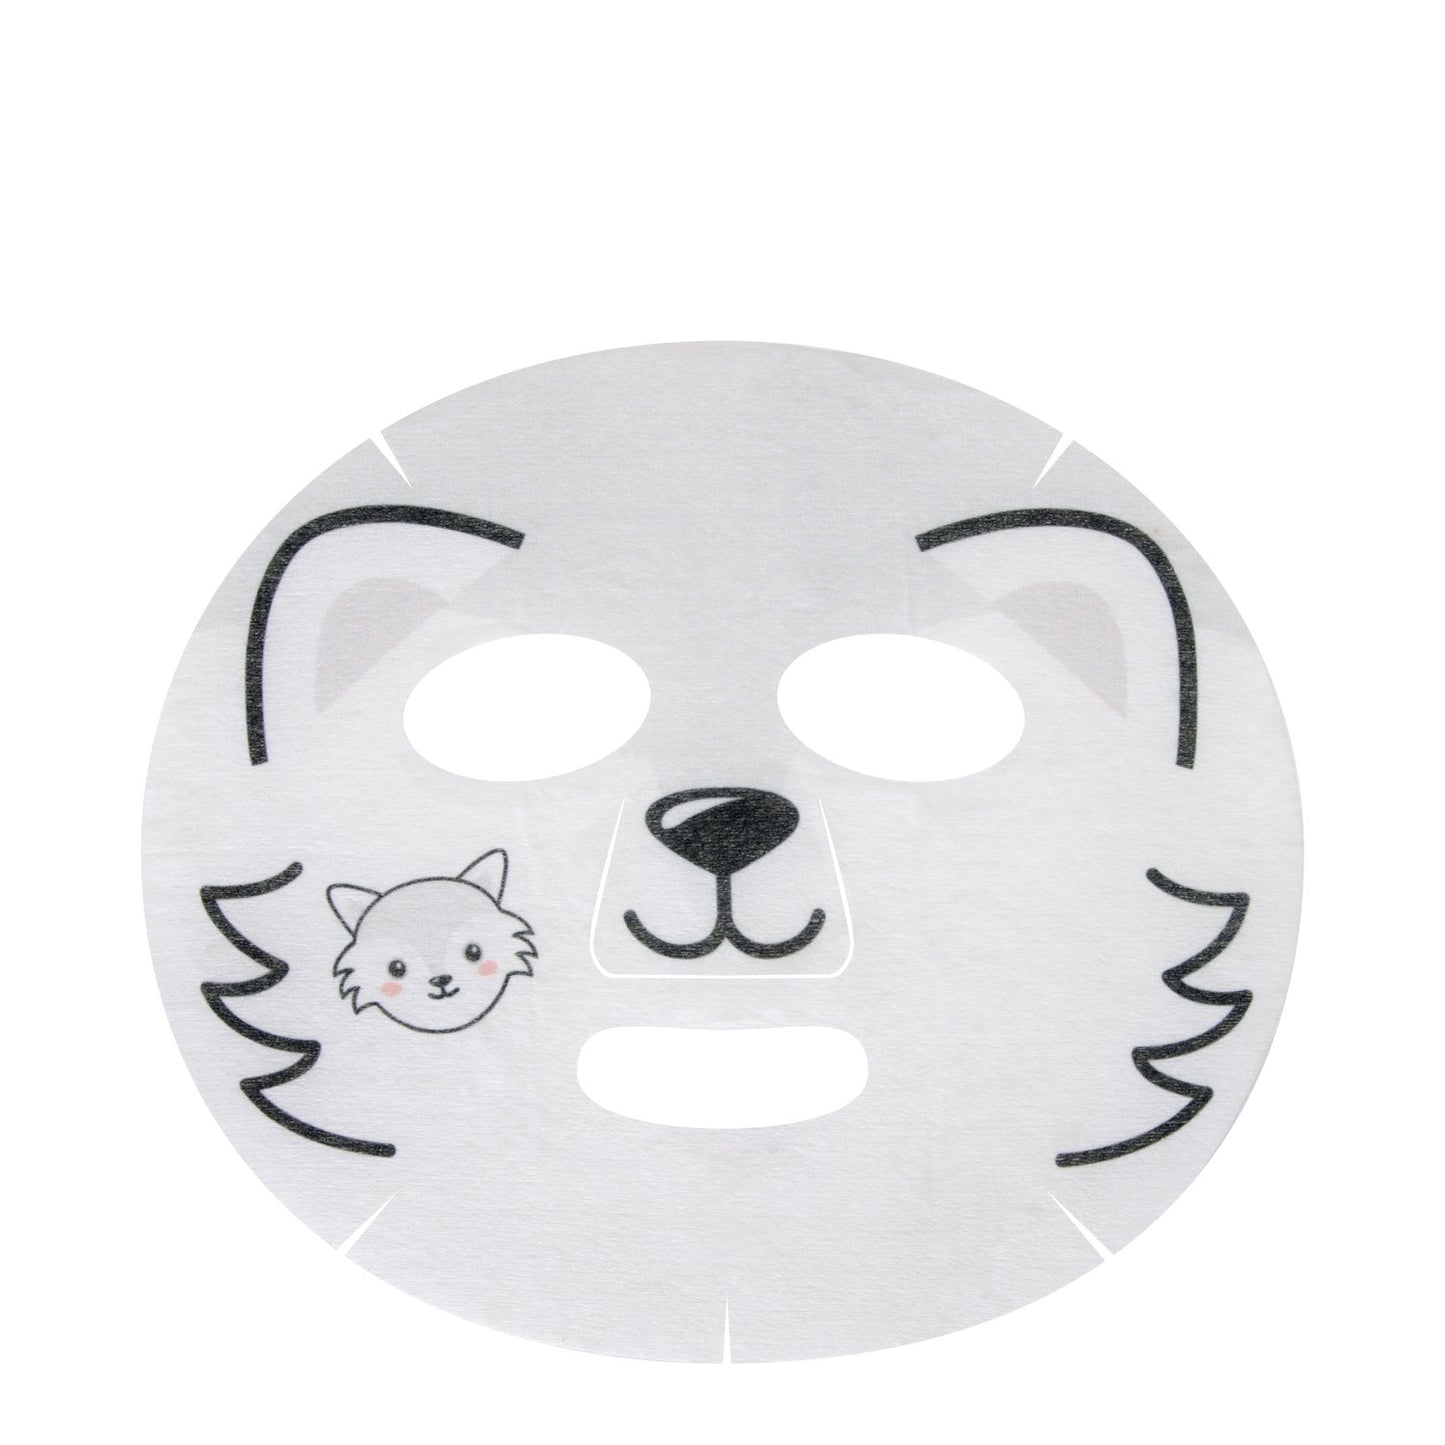 Chill Out, Skin! Animated Arctic Fox Face Mask - Hydrating & Cooling Glacial Water - The Crème Shop